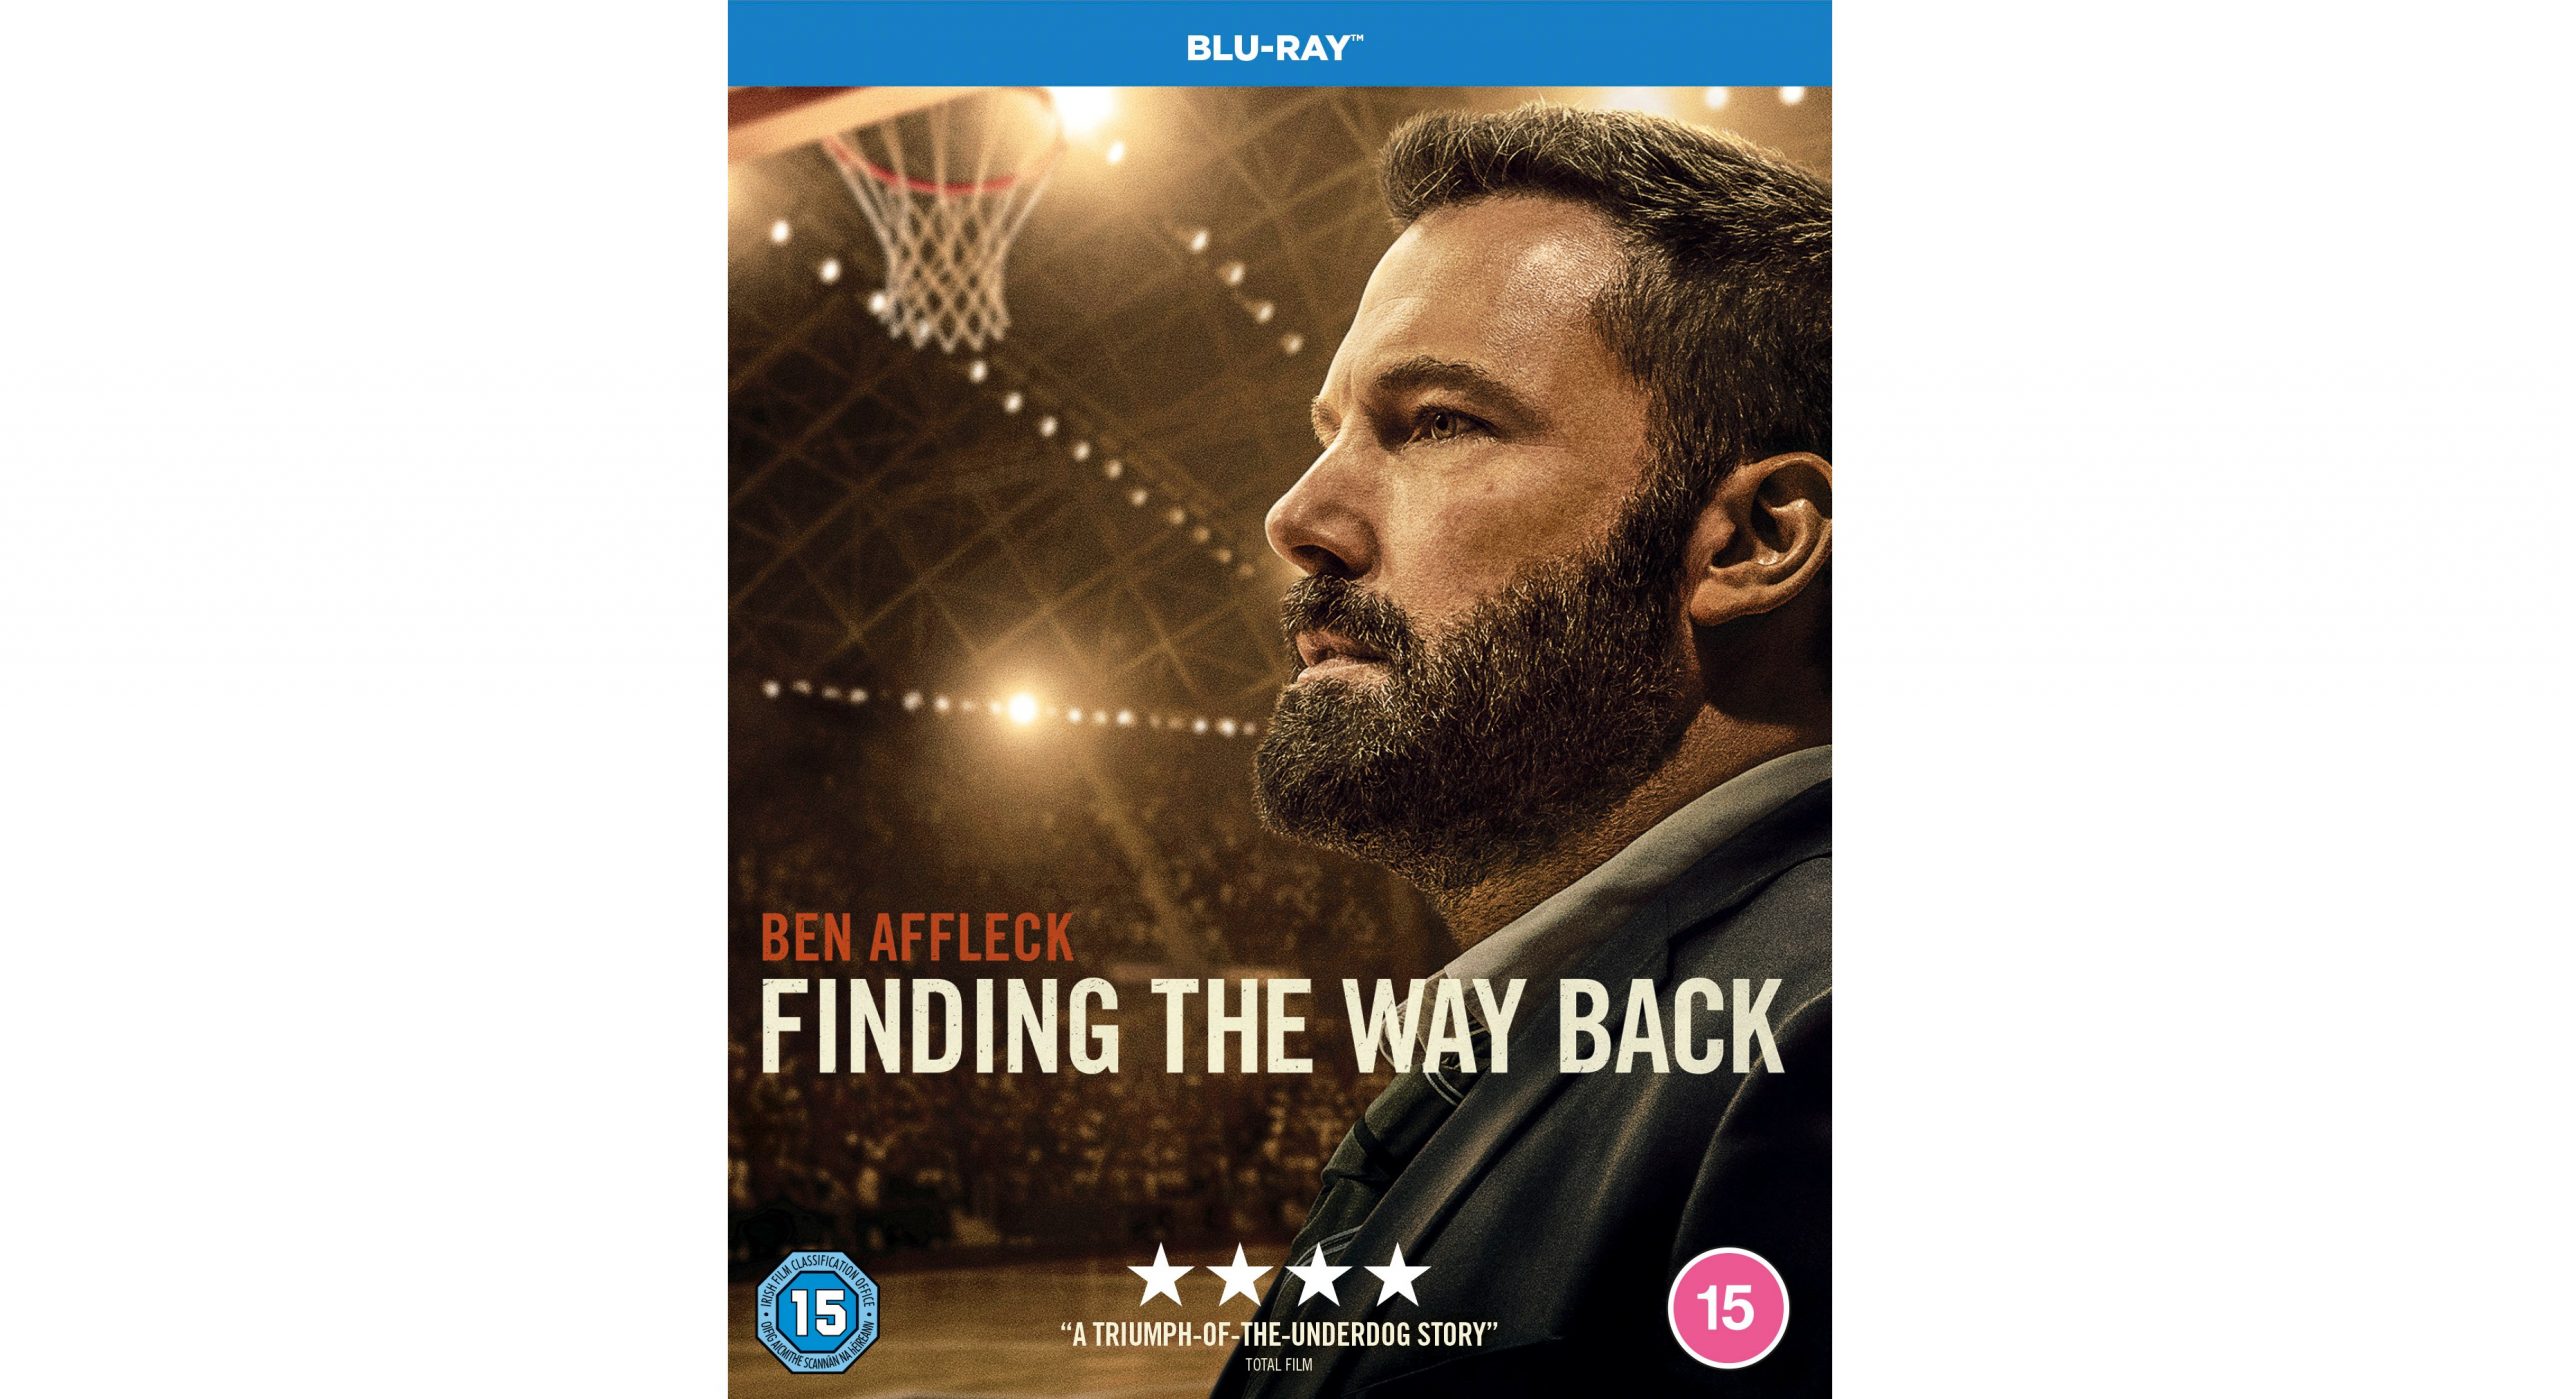 The Way Back Movie 2020 Wallpapers